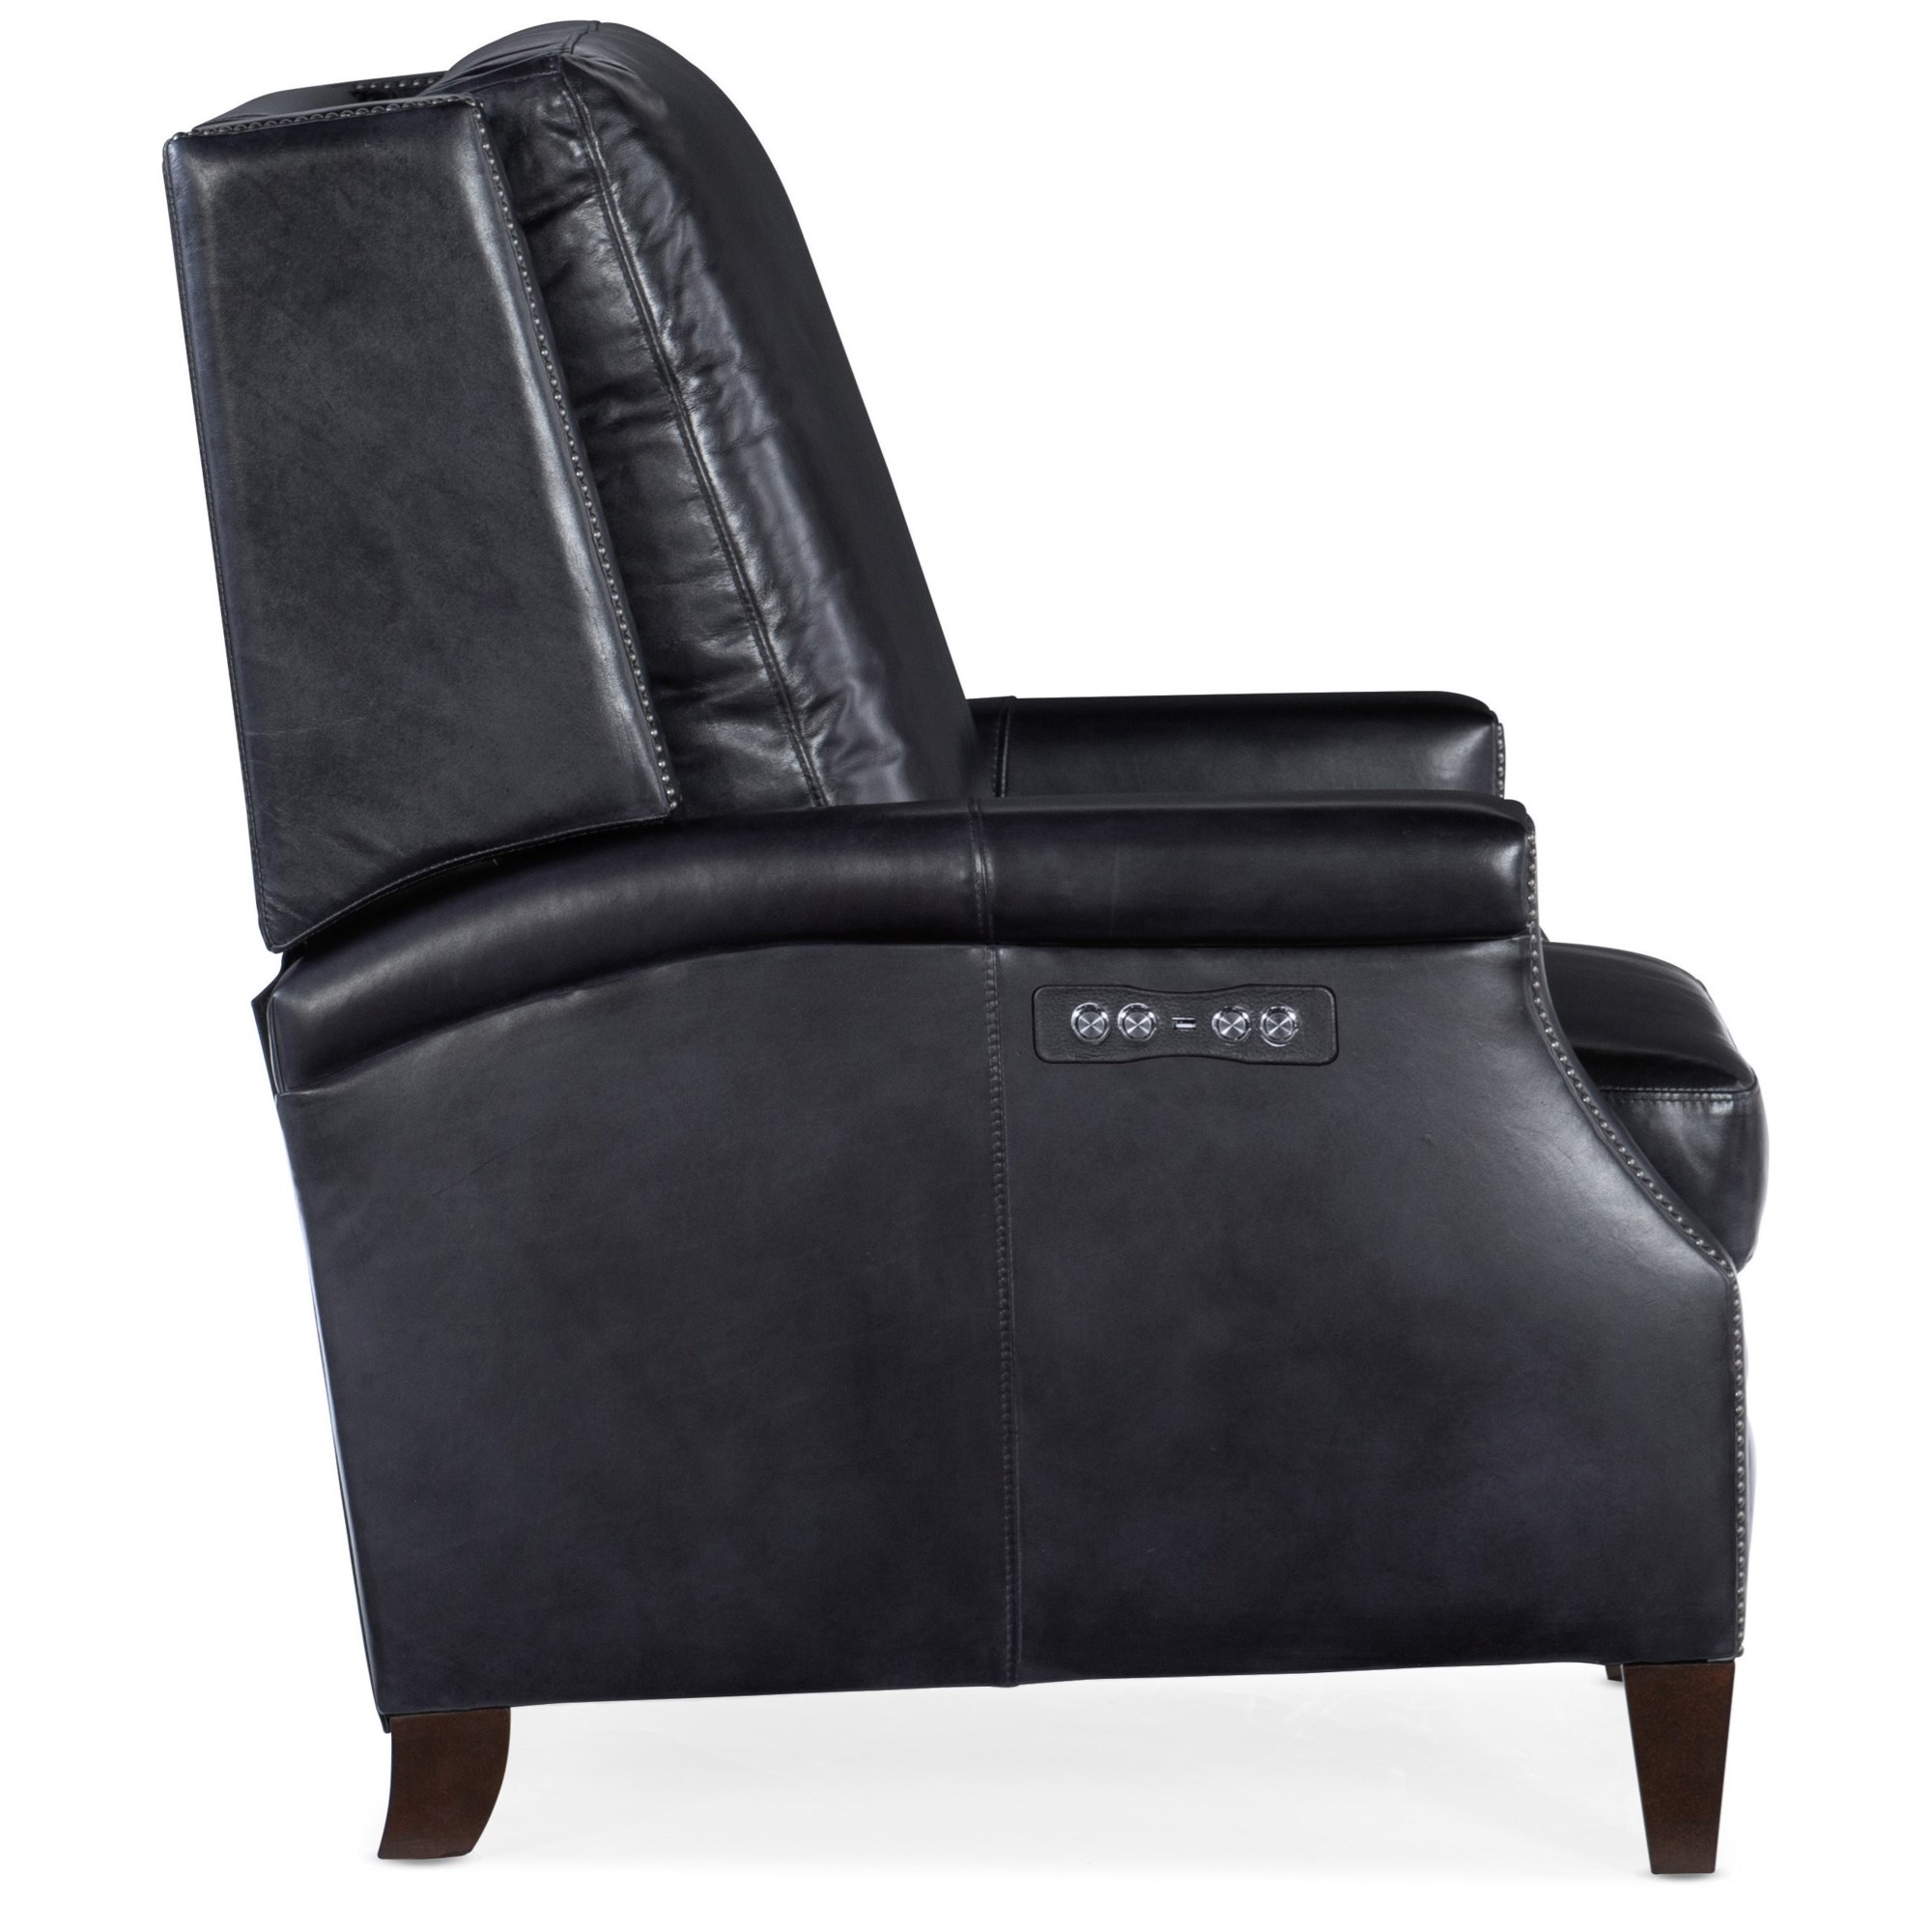 Hooker Furniture Collin 725902417 Transitional Power Leather Recliner with  Power Headrest, Belfort Furniture